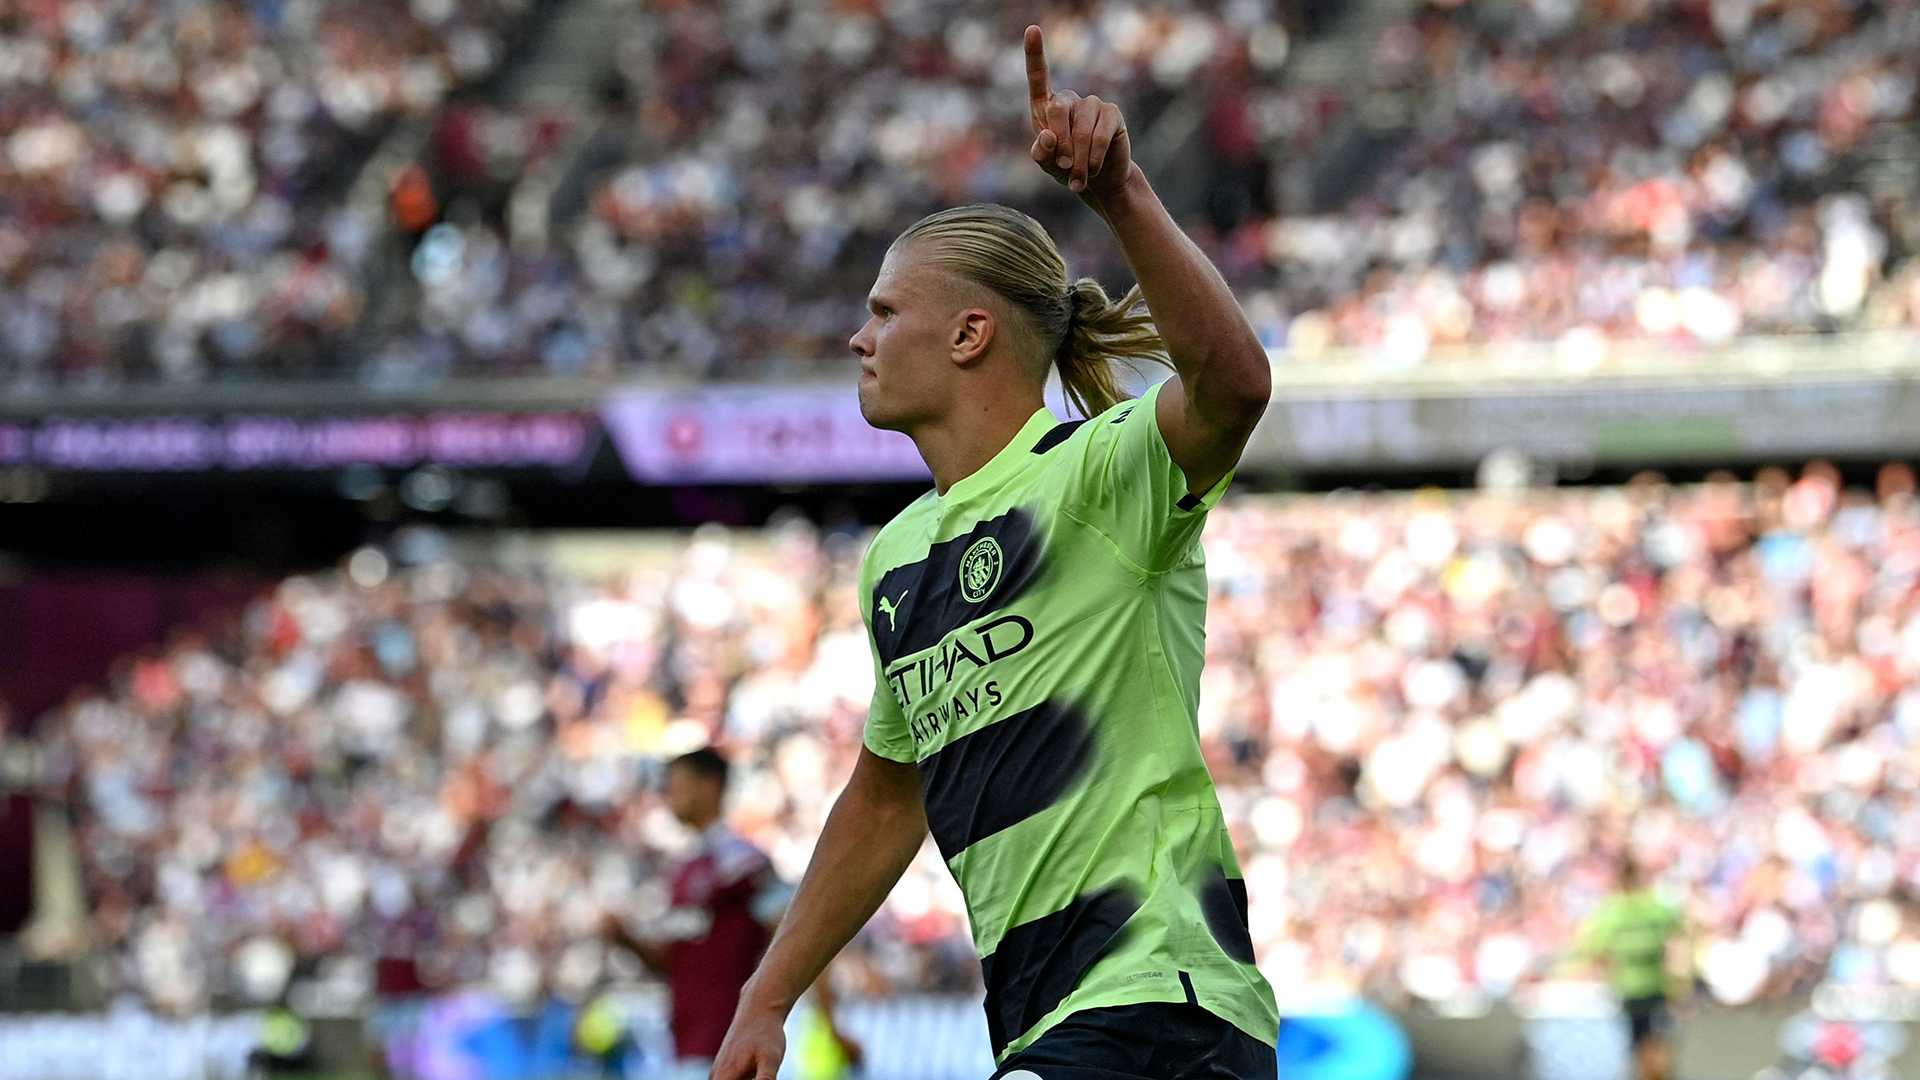 Manchester City's Norwegian striker Erling Haaland celebrates after scoring their second goal during the English Premier League football match between West Ham United and Manchester City at the London Stadium, in London on August 7, 2022.